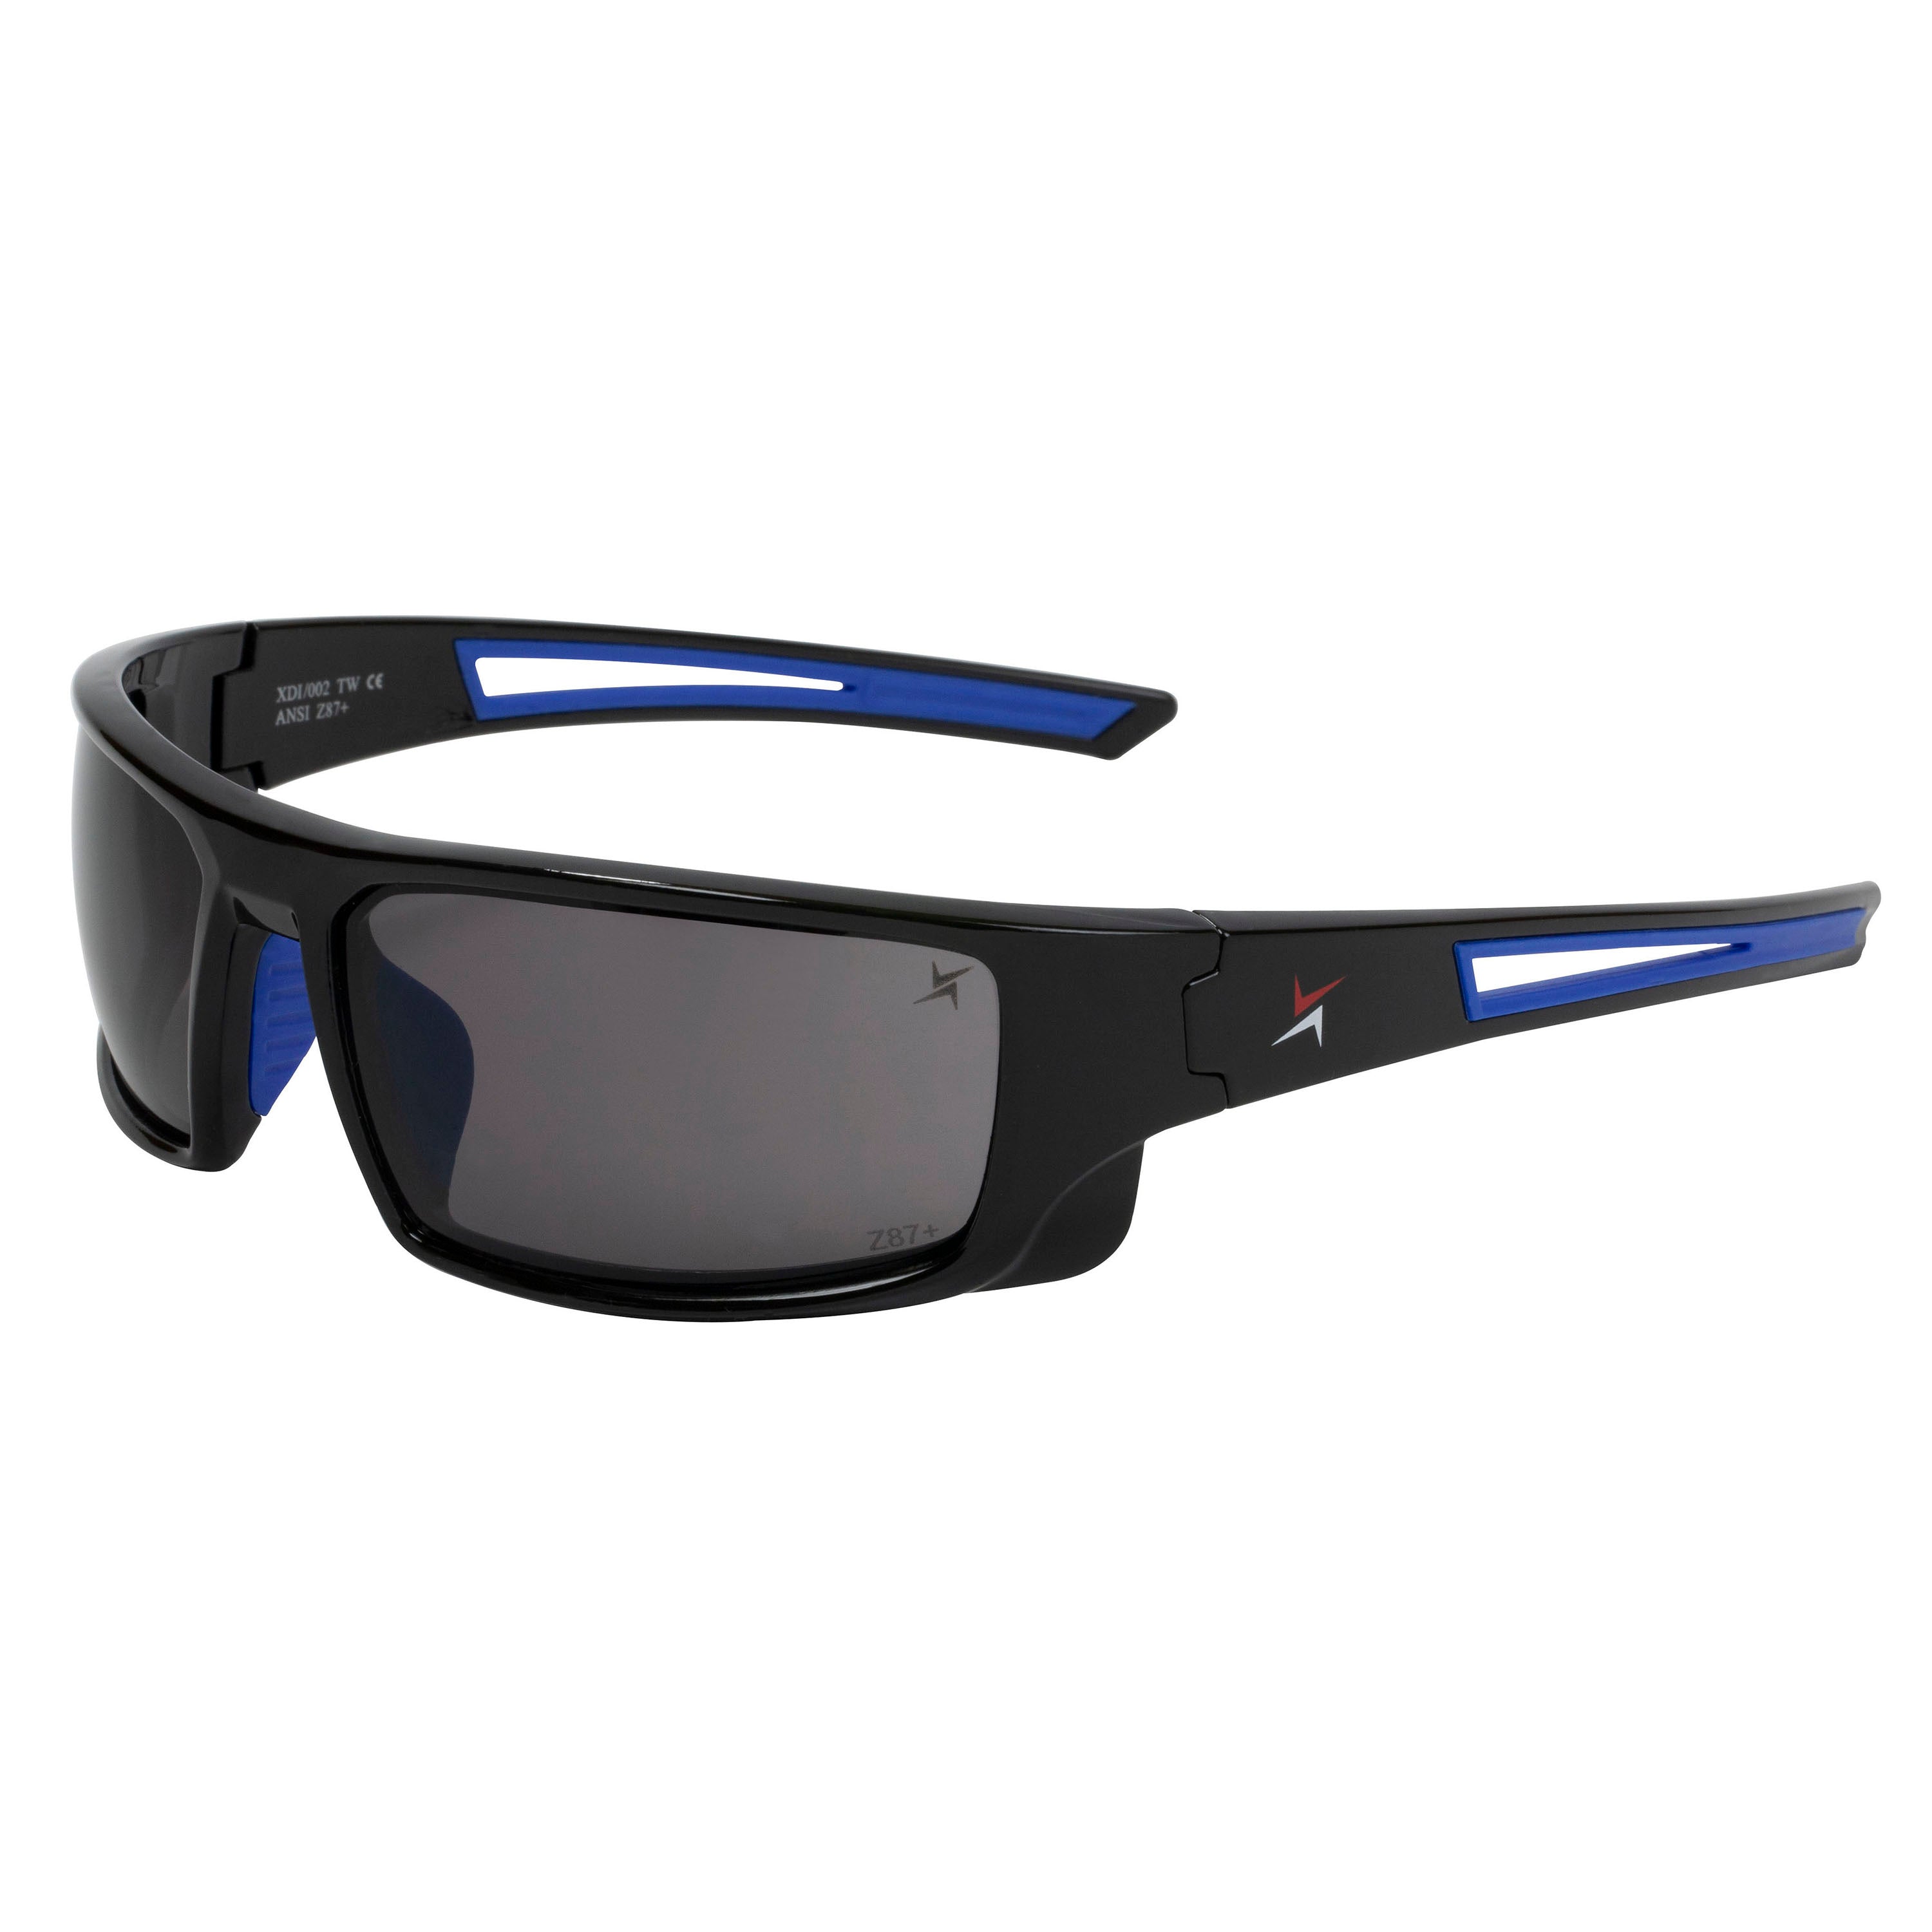 Dark Smoke Lens Sport Safety Sunglasses with Blue Rubber Accents.